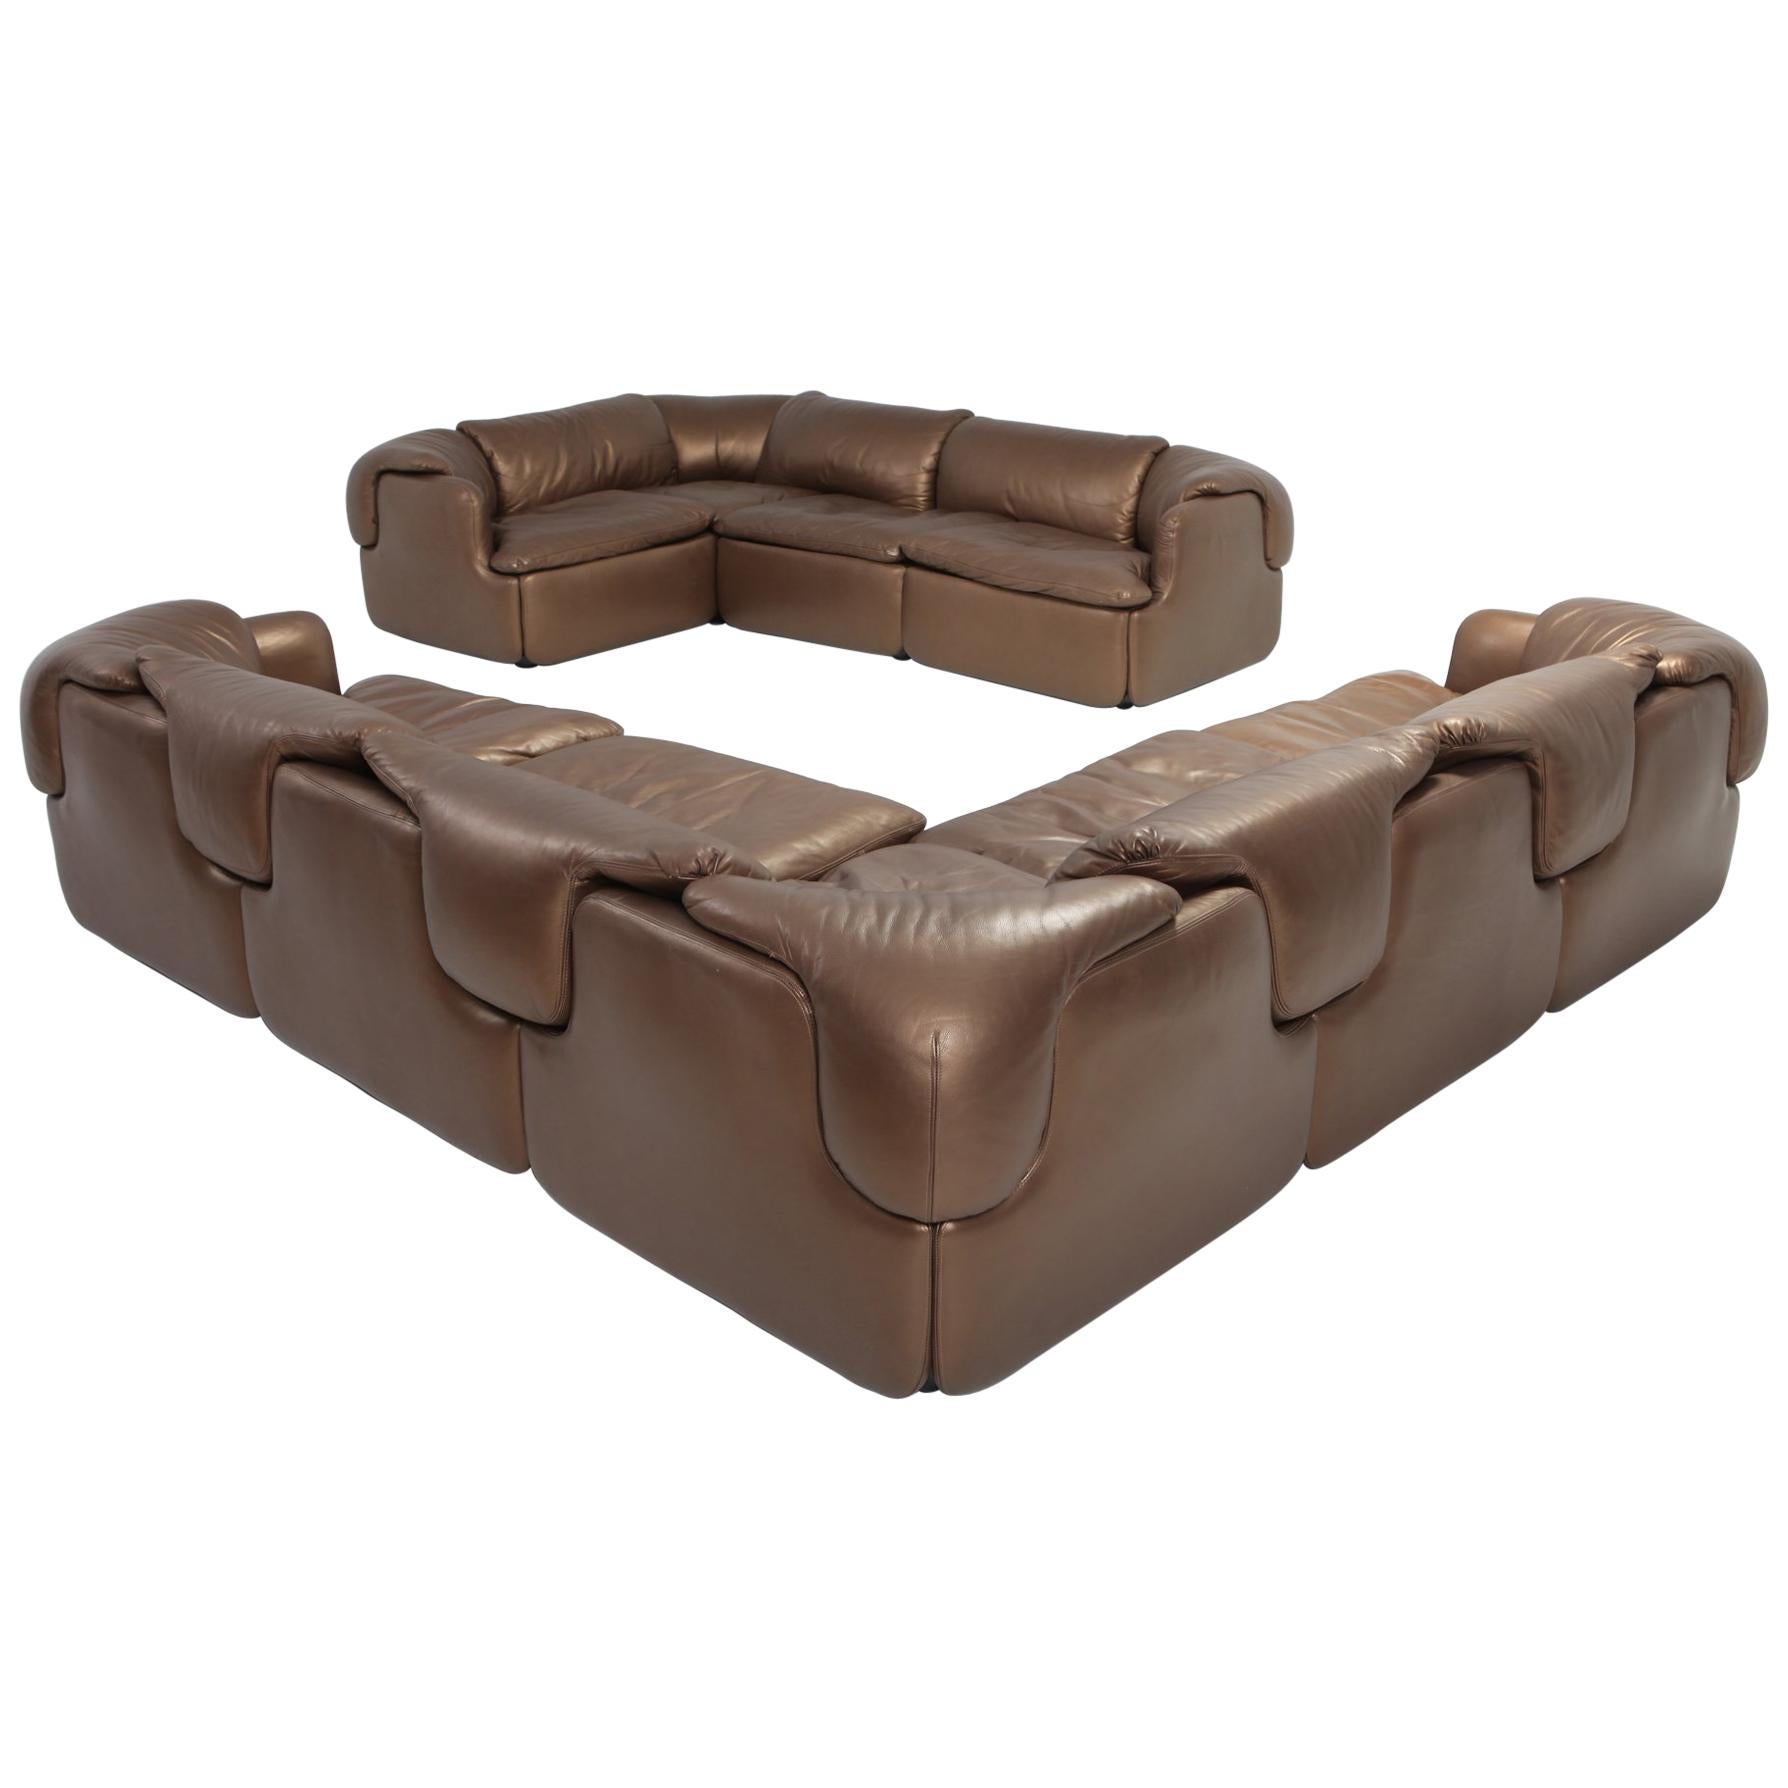 Bronze Leather Saporiti High-End Sectional Sofa 'Confidential'